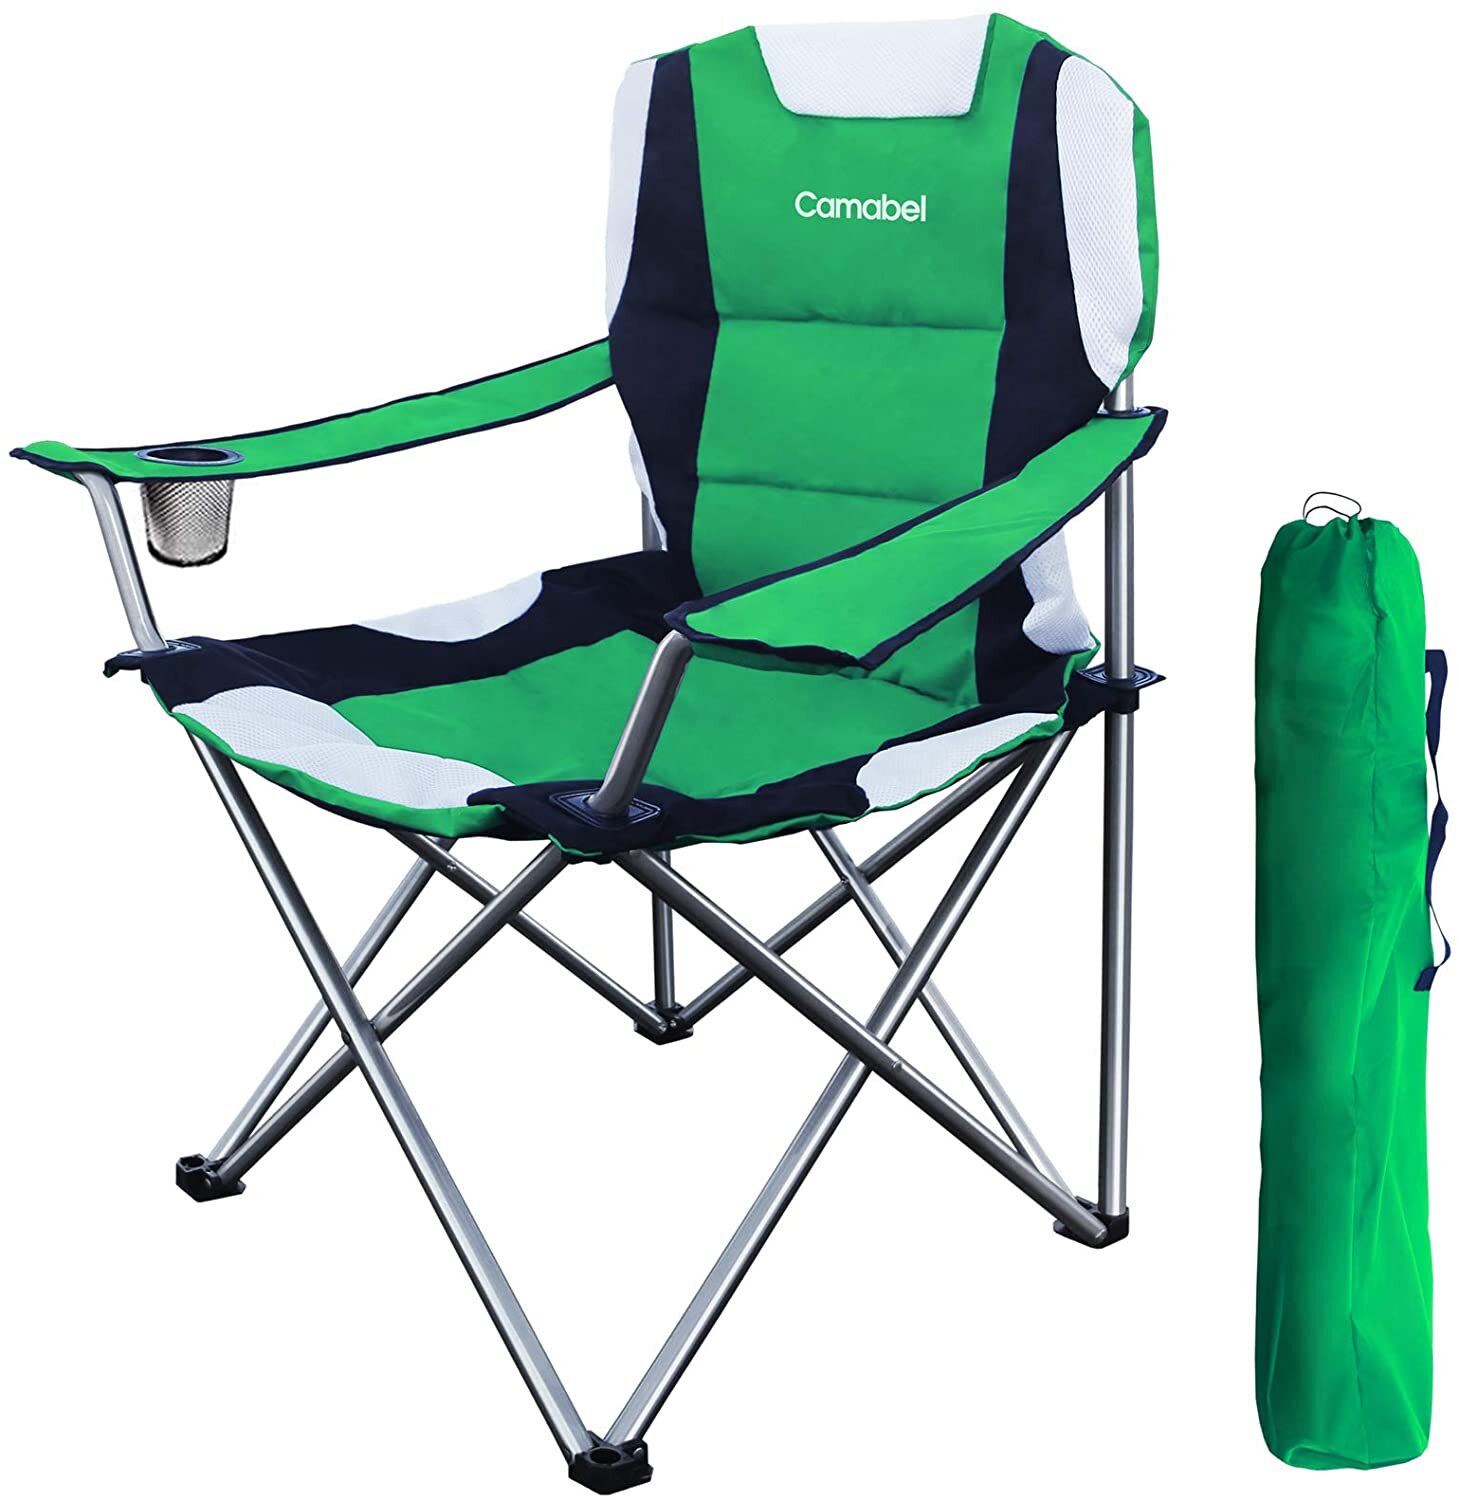 Large Folding Oversized Travel Foldable Camp Camping Chair Seat w Carry Bag 